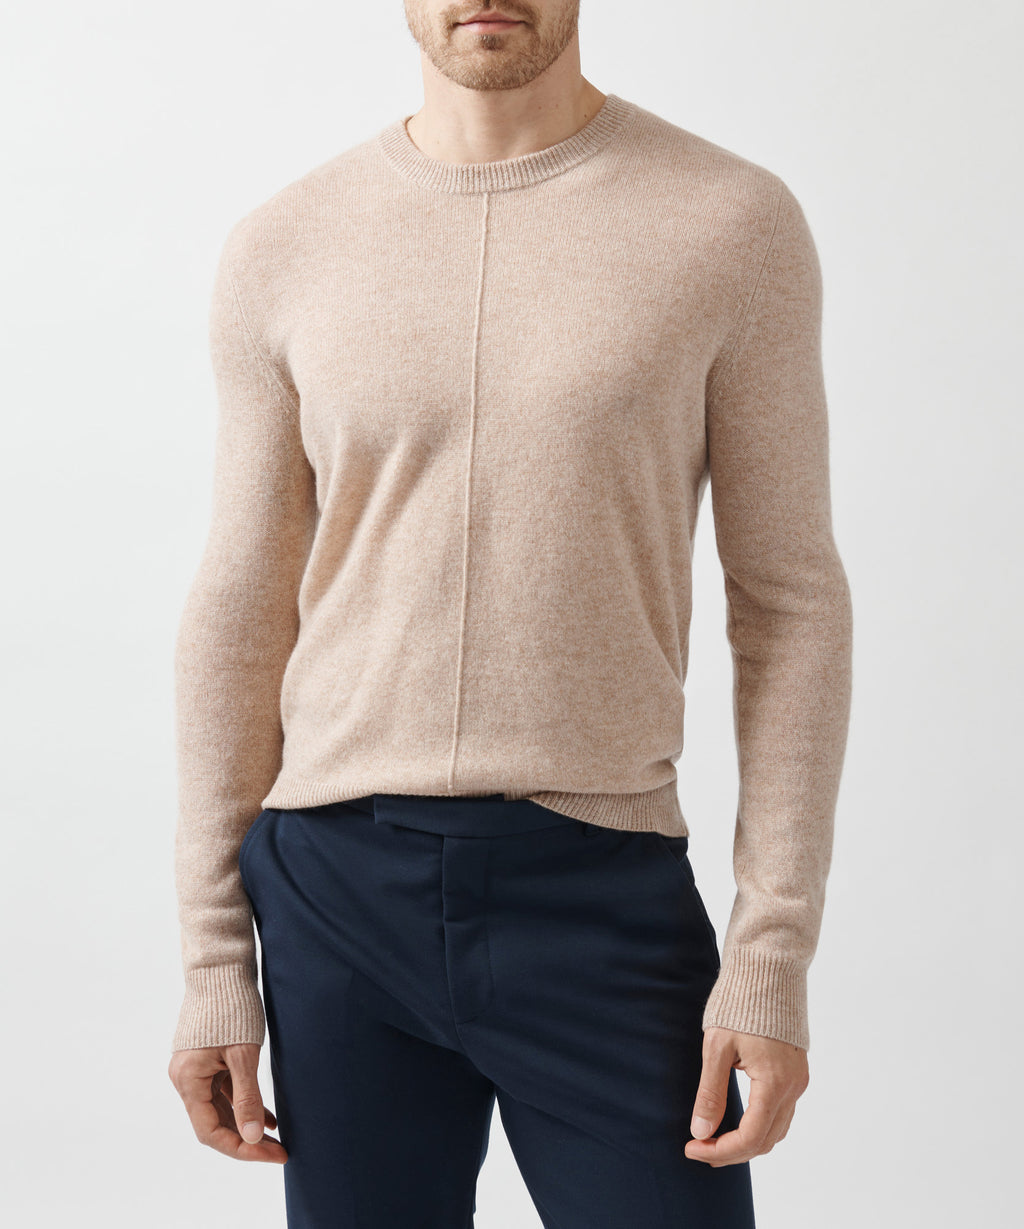 Recycled Cashmere Exposed Seam Crew Neck Sweater - Caramel